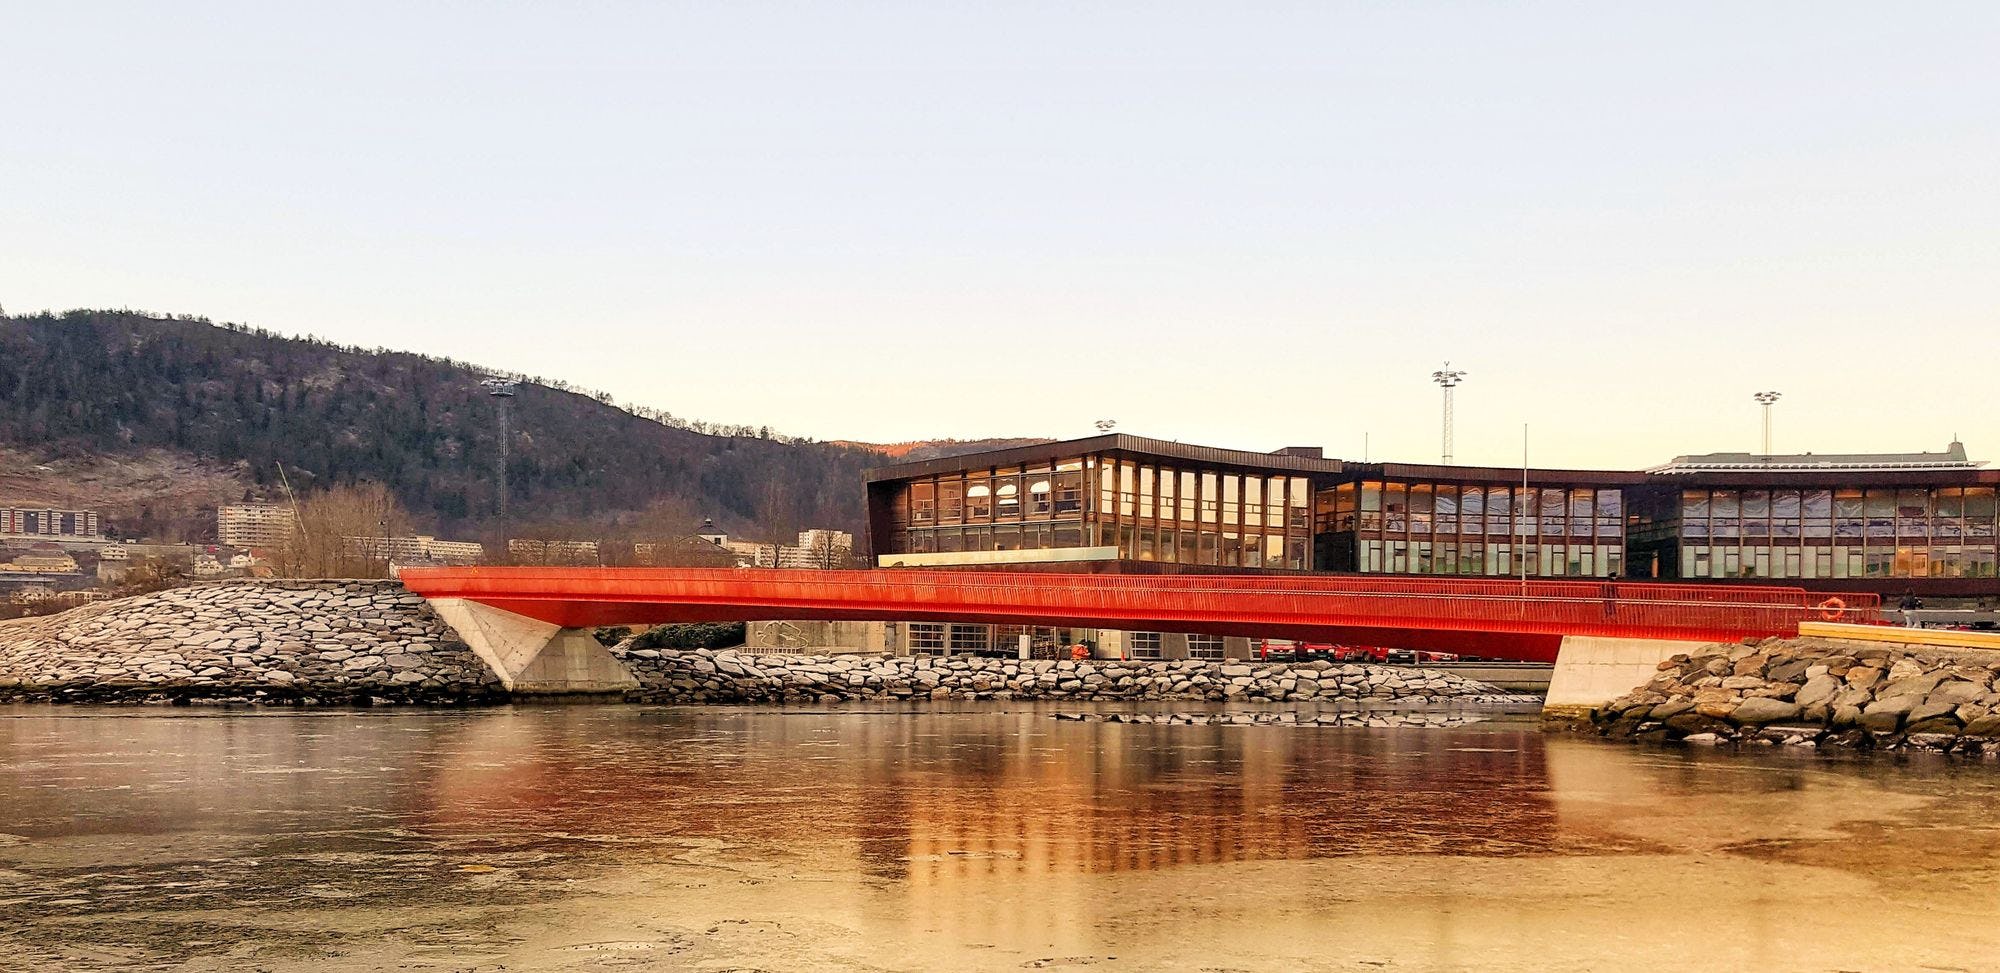 A red bridge spanning a calm river with a modern building and reflective water in the foreground